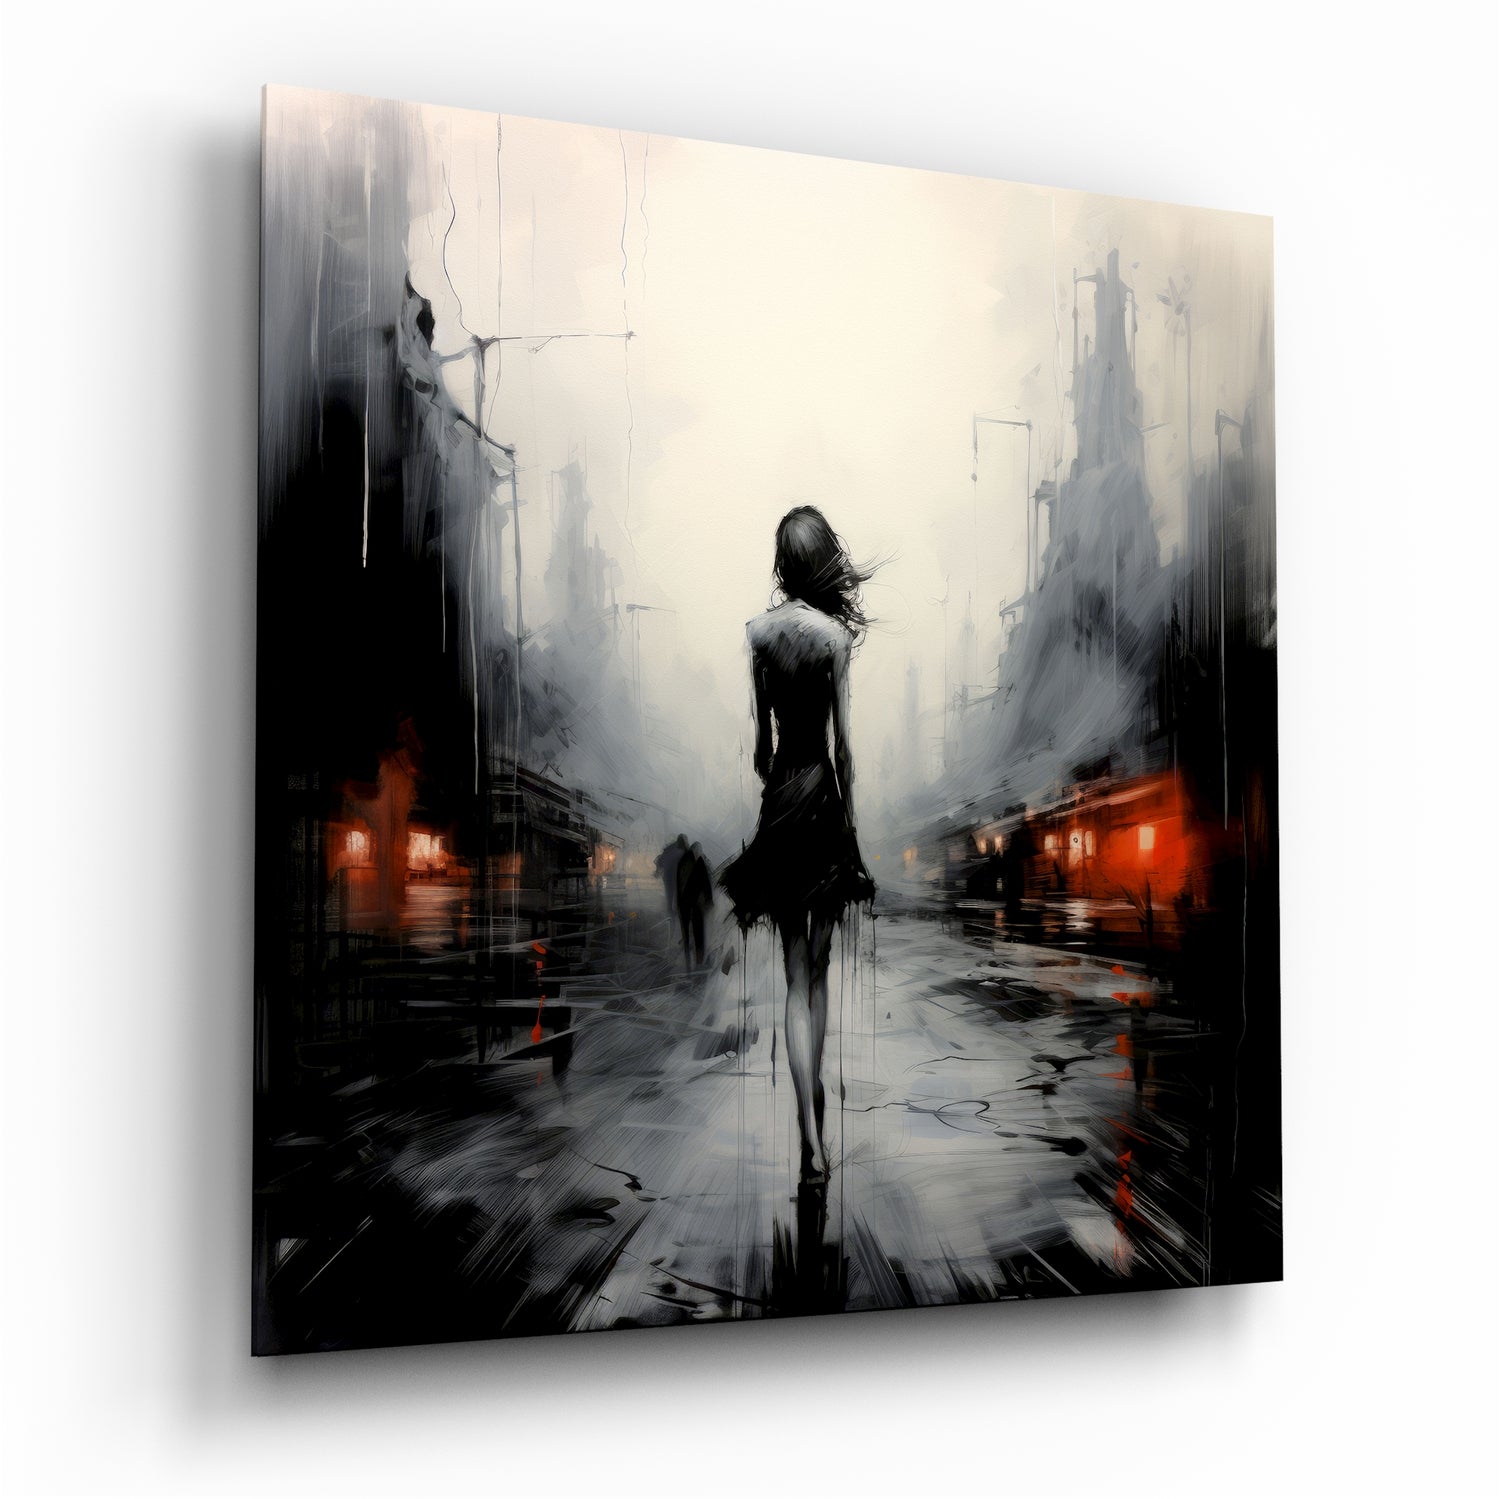 Alone Glass Wall Art|| Designer's Collection